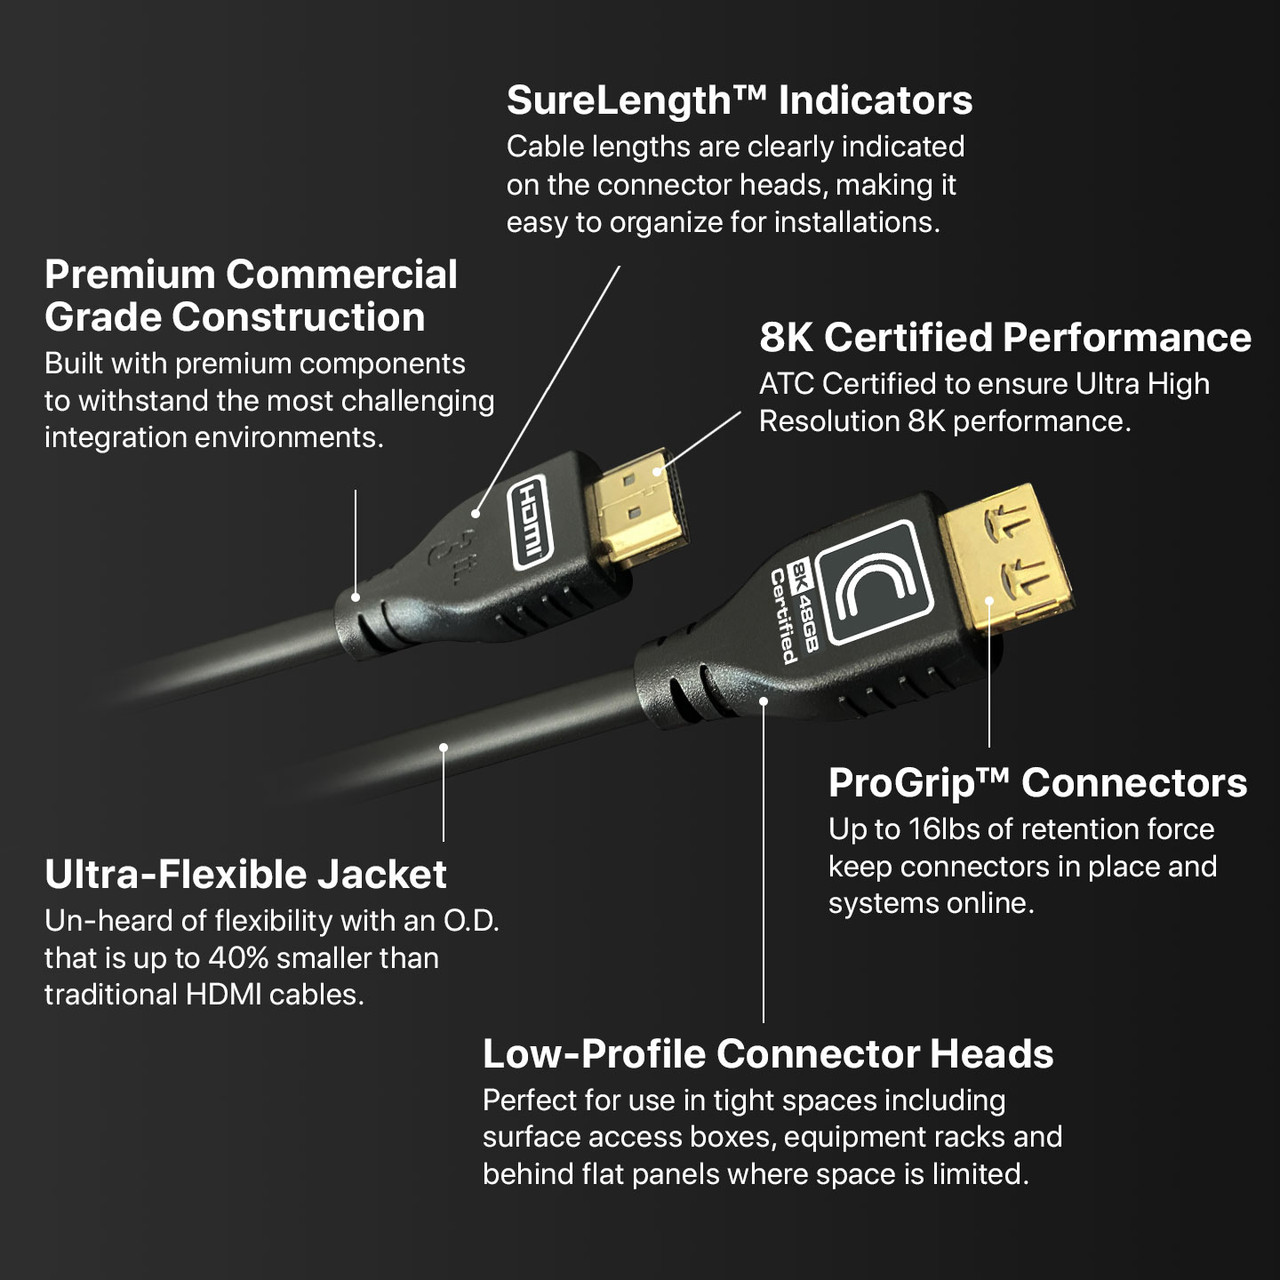 Cable HDMI VALUE High Speed + Ethernet, M/M, 3m, color Negro